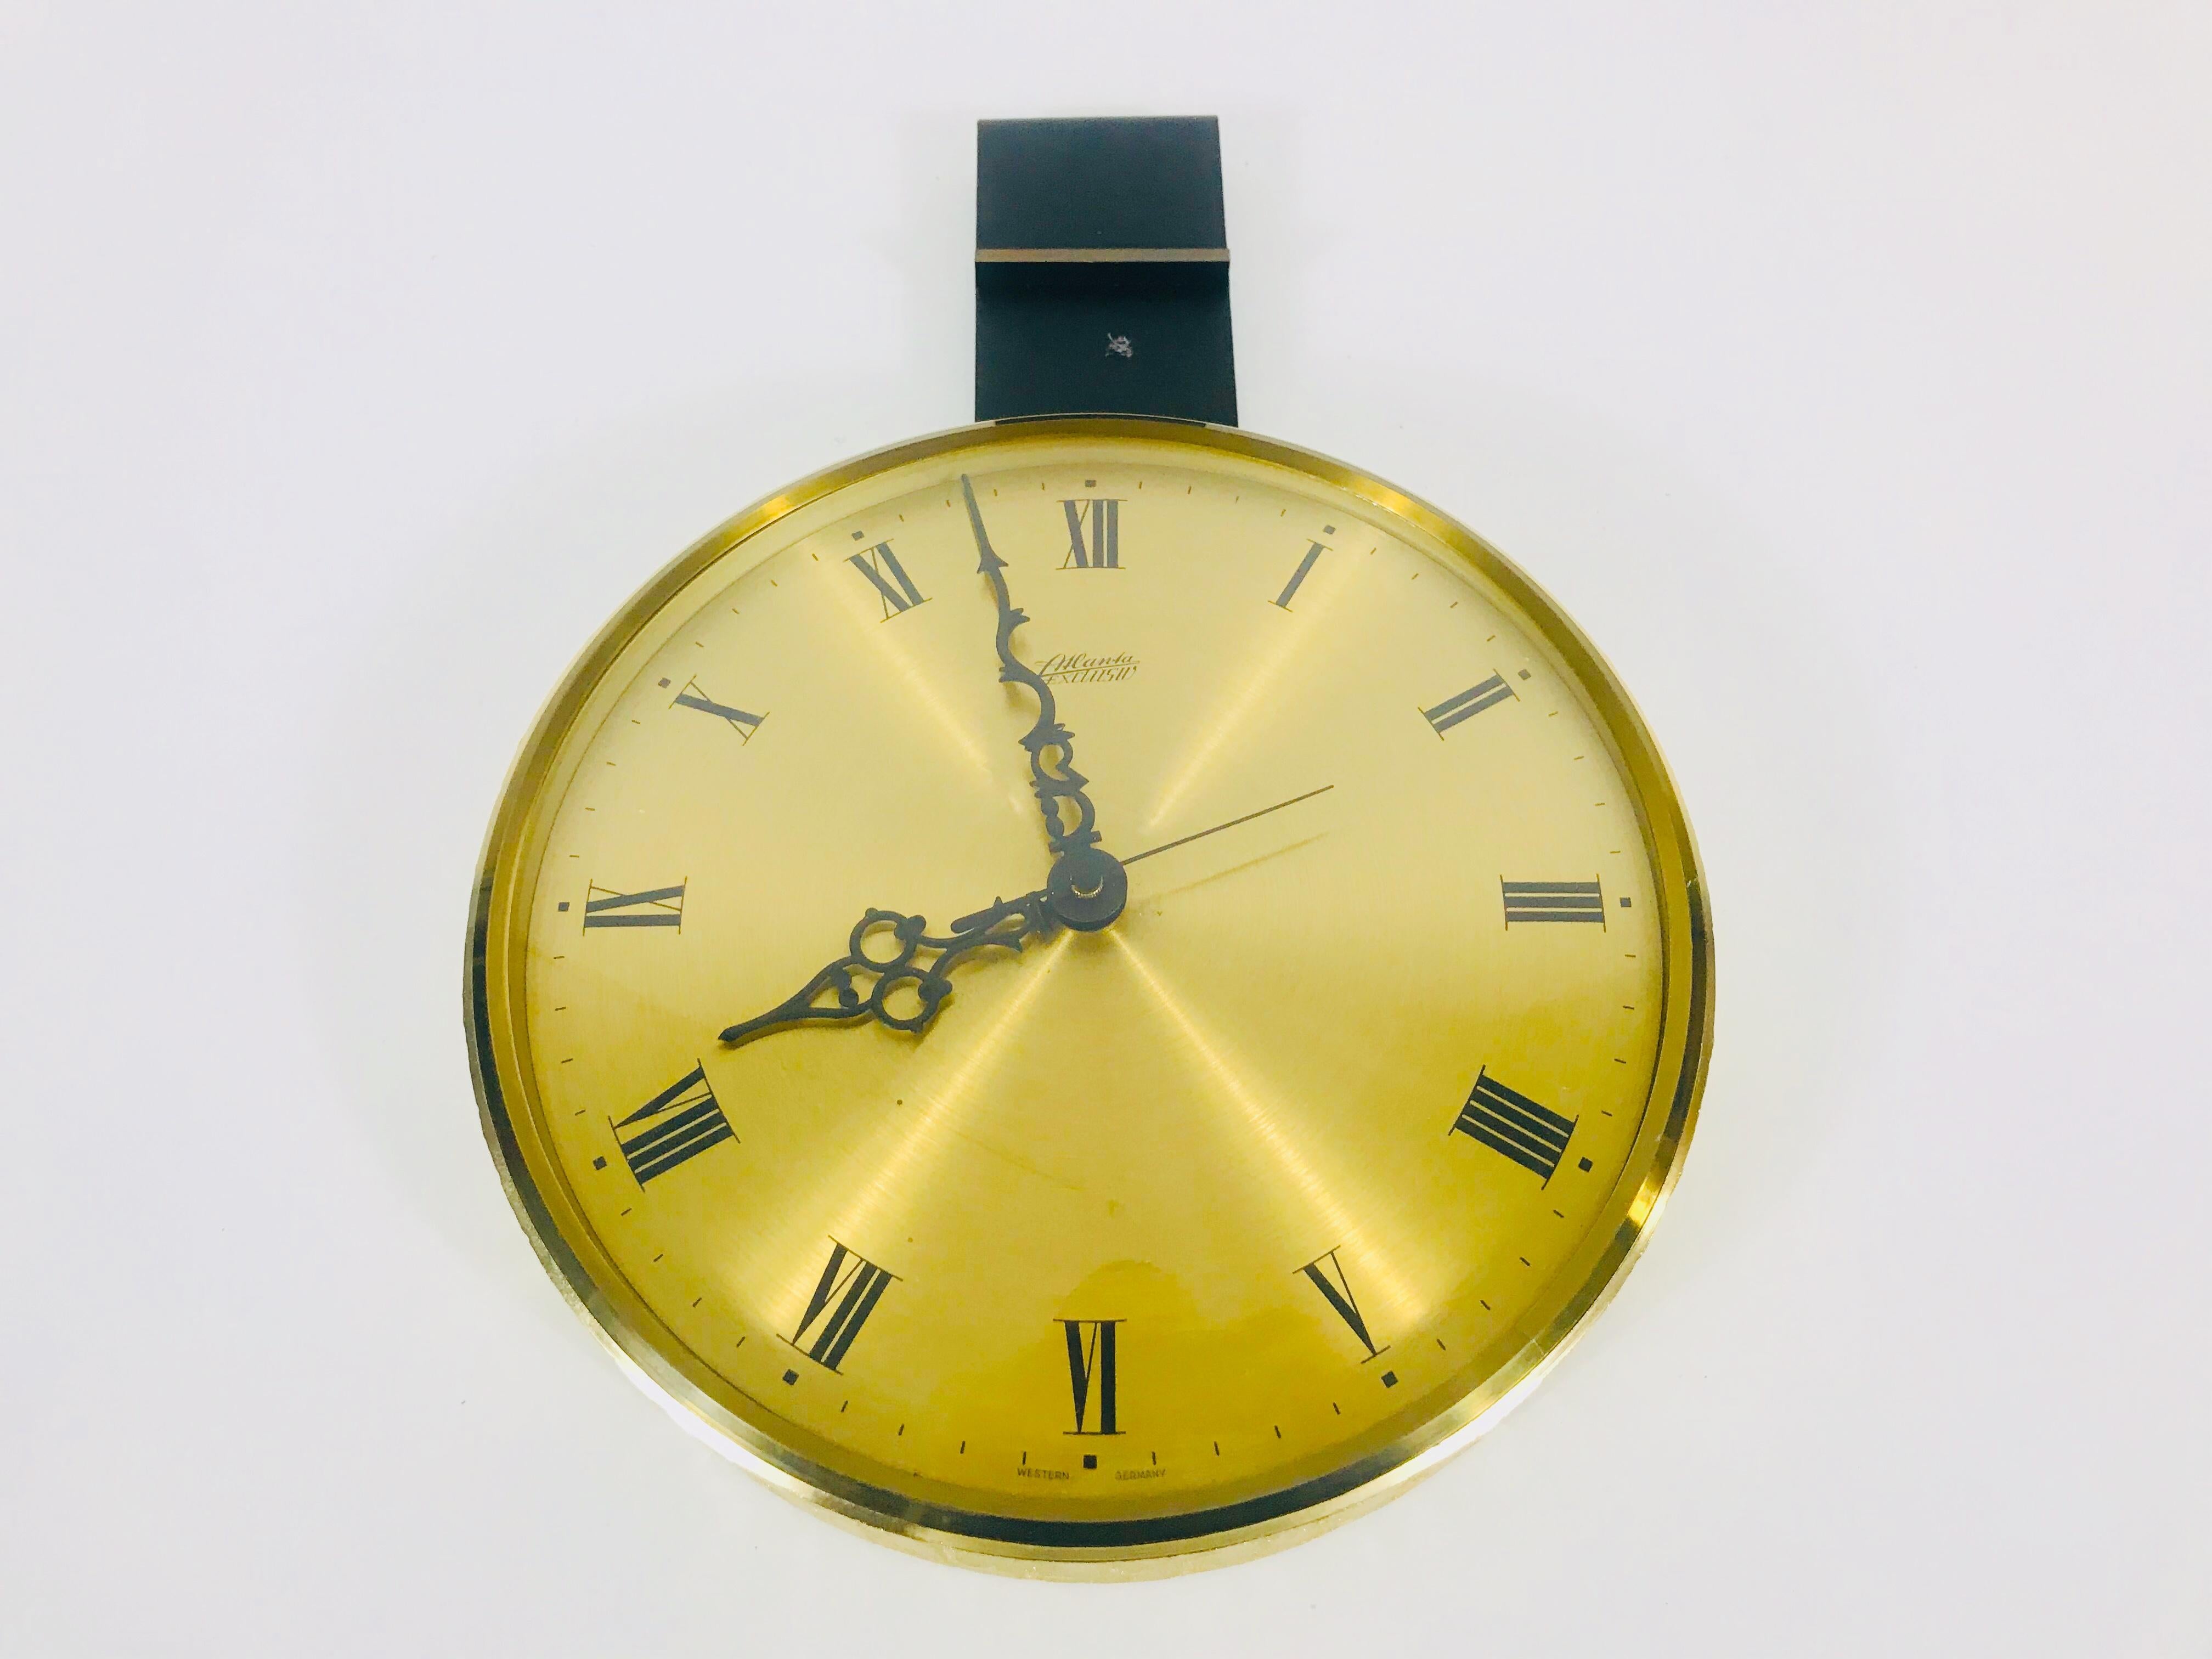 An exceptional wall clock made by Atlanta in the 1960s. It has an acrylic glass body with frame.